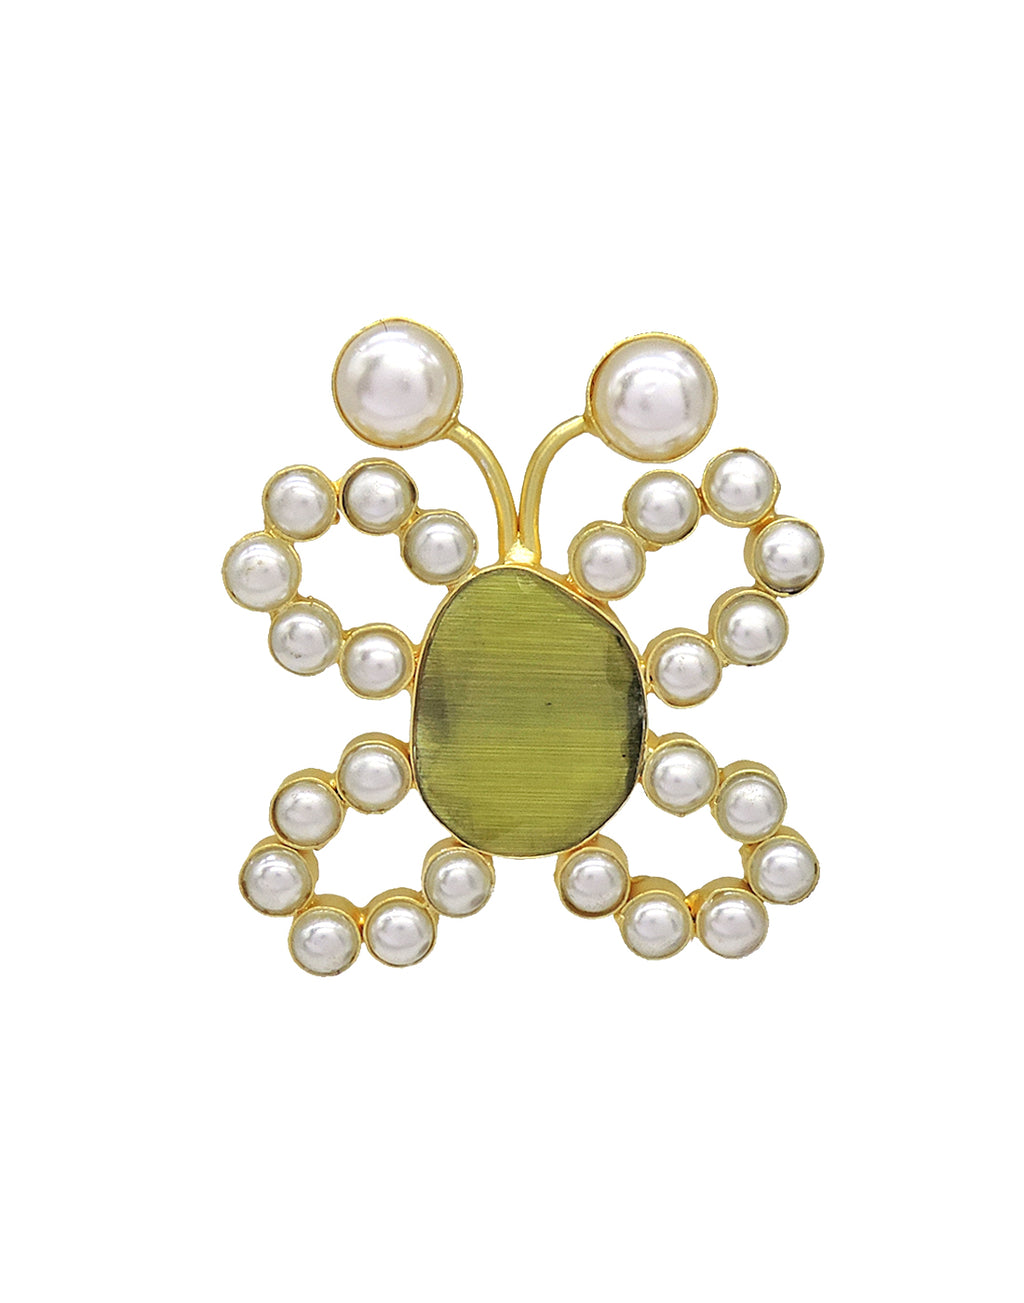 Butterfly Pearl Ring - Statement Rings - Gold-Plated & Hypoallergenic Jewellery - Made in India - Dubai Jewellery - Dori